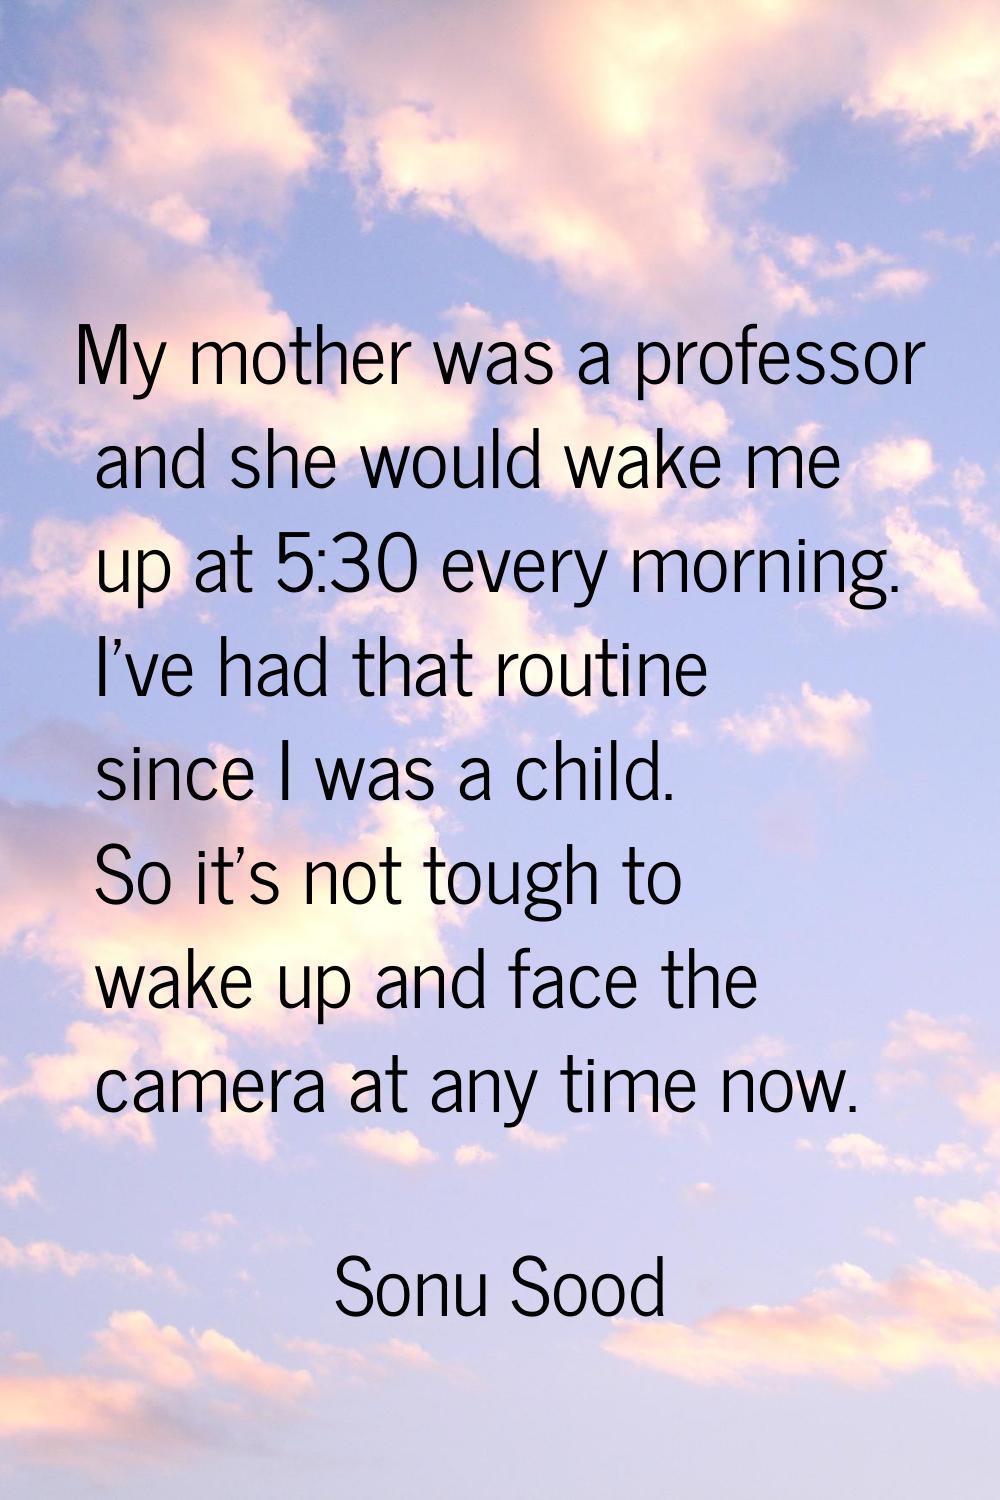 My mother was a professor and she would wake me up at 5:30 every morning. I've had that routine sin